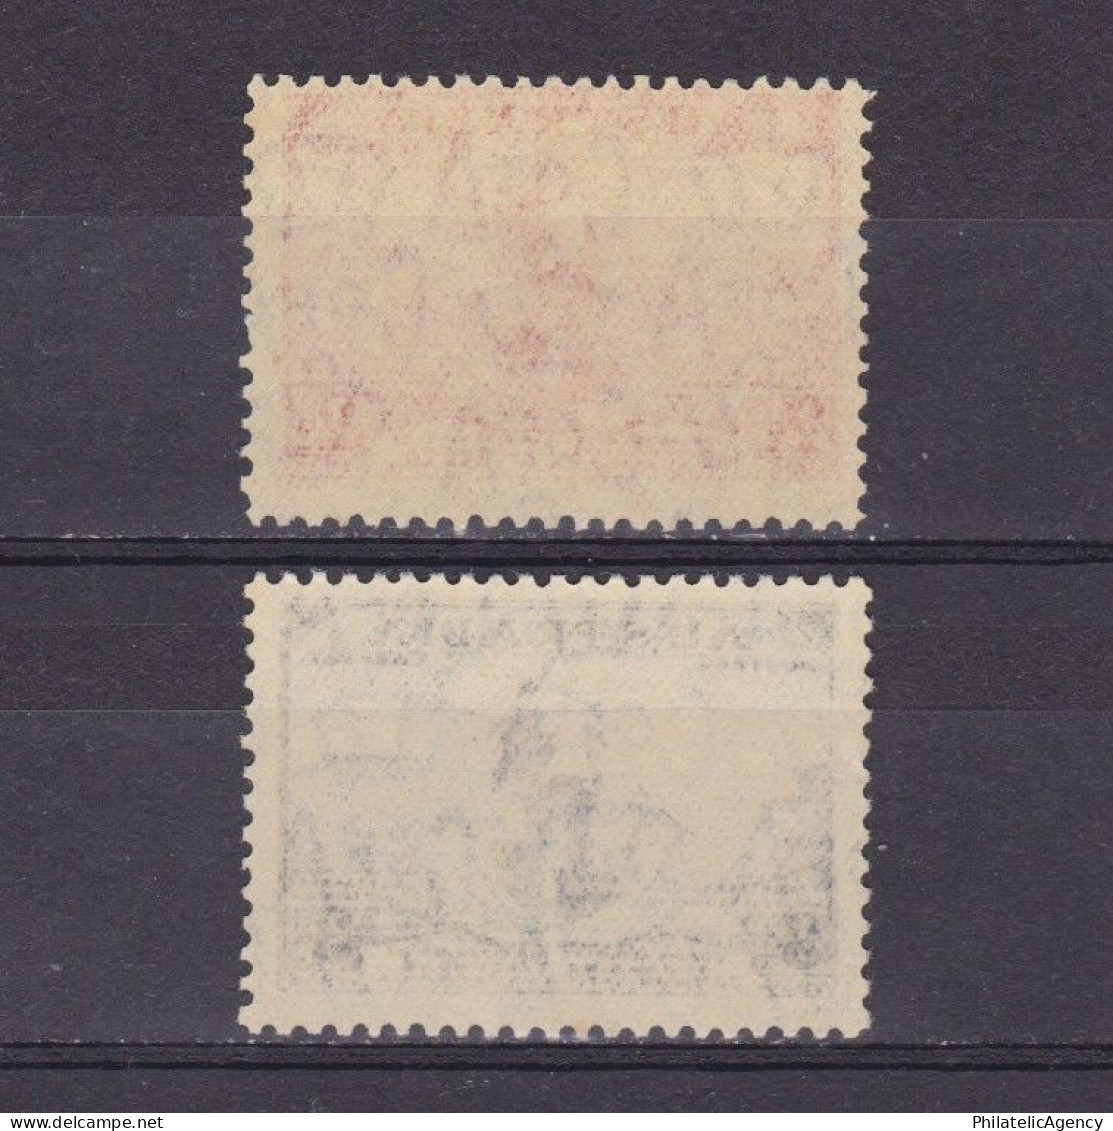 AUSTRALIA 1936, SG# 159-160, Cables Between Australia And Tasmania, MH - Mint Stamps